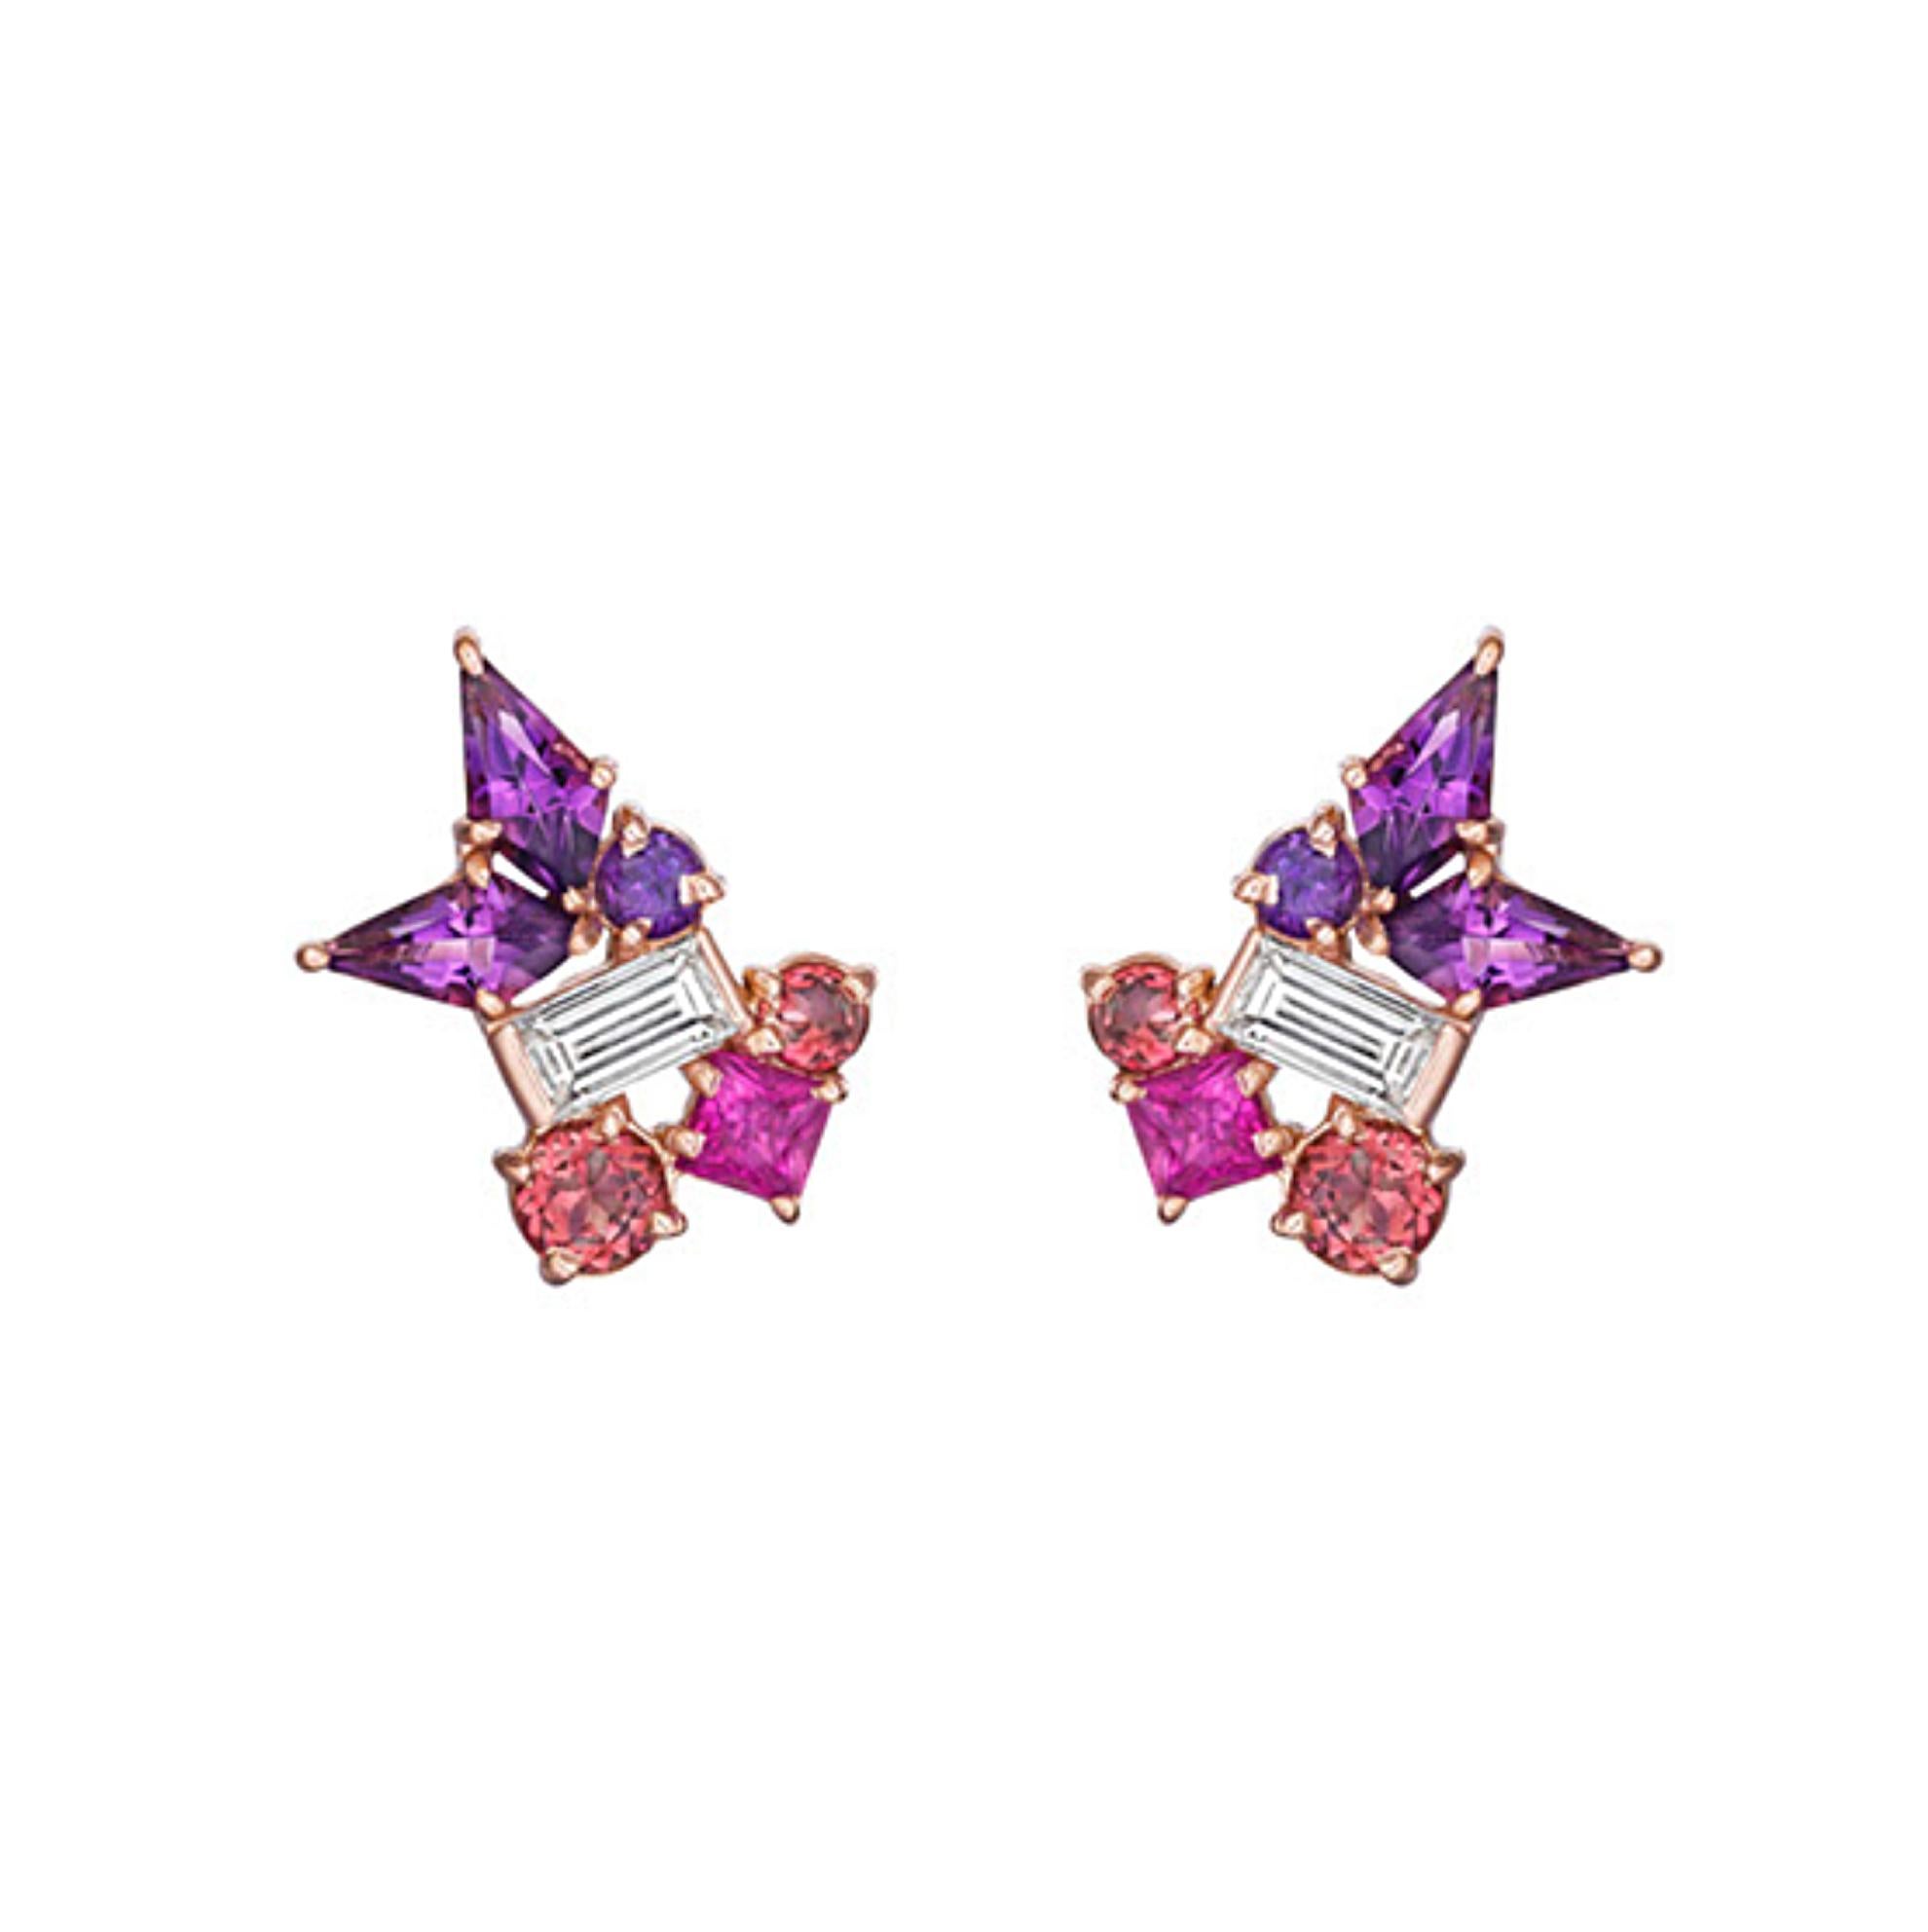 Baguette Cut Melting Ice Amethyst and Pink Sapphire Earrings by MadStone For Sale